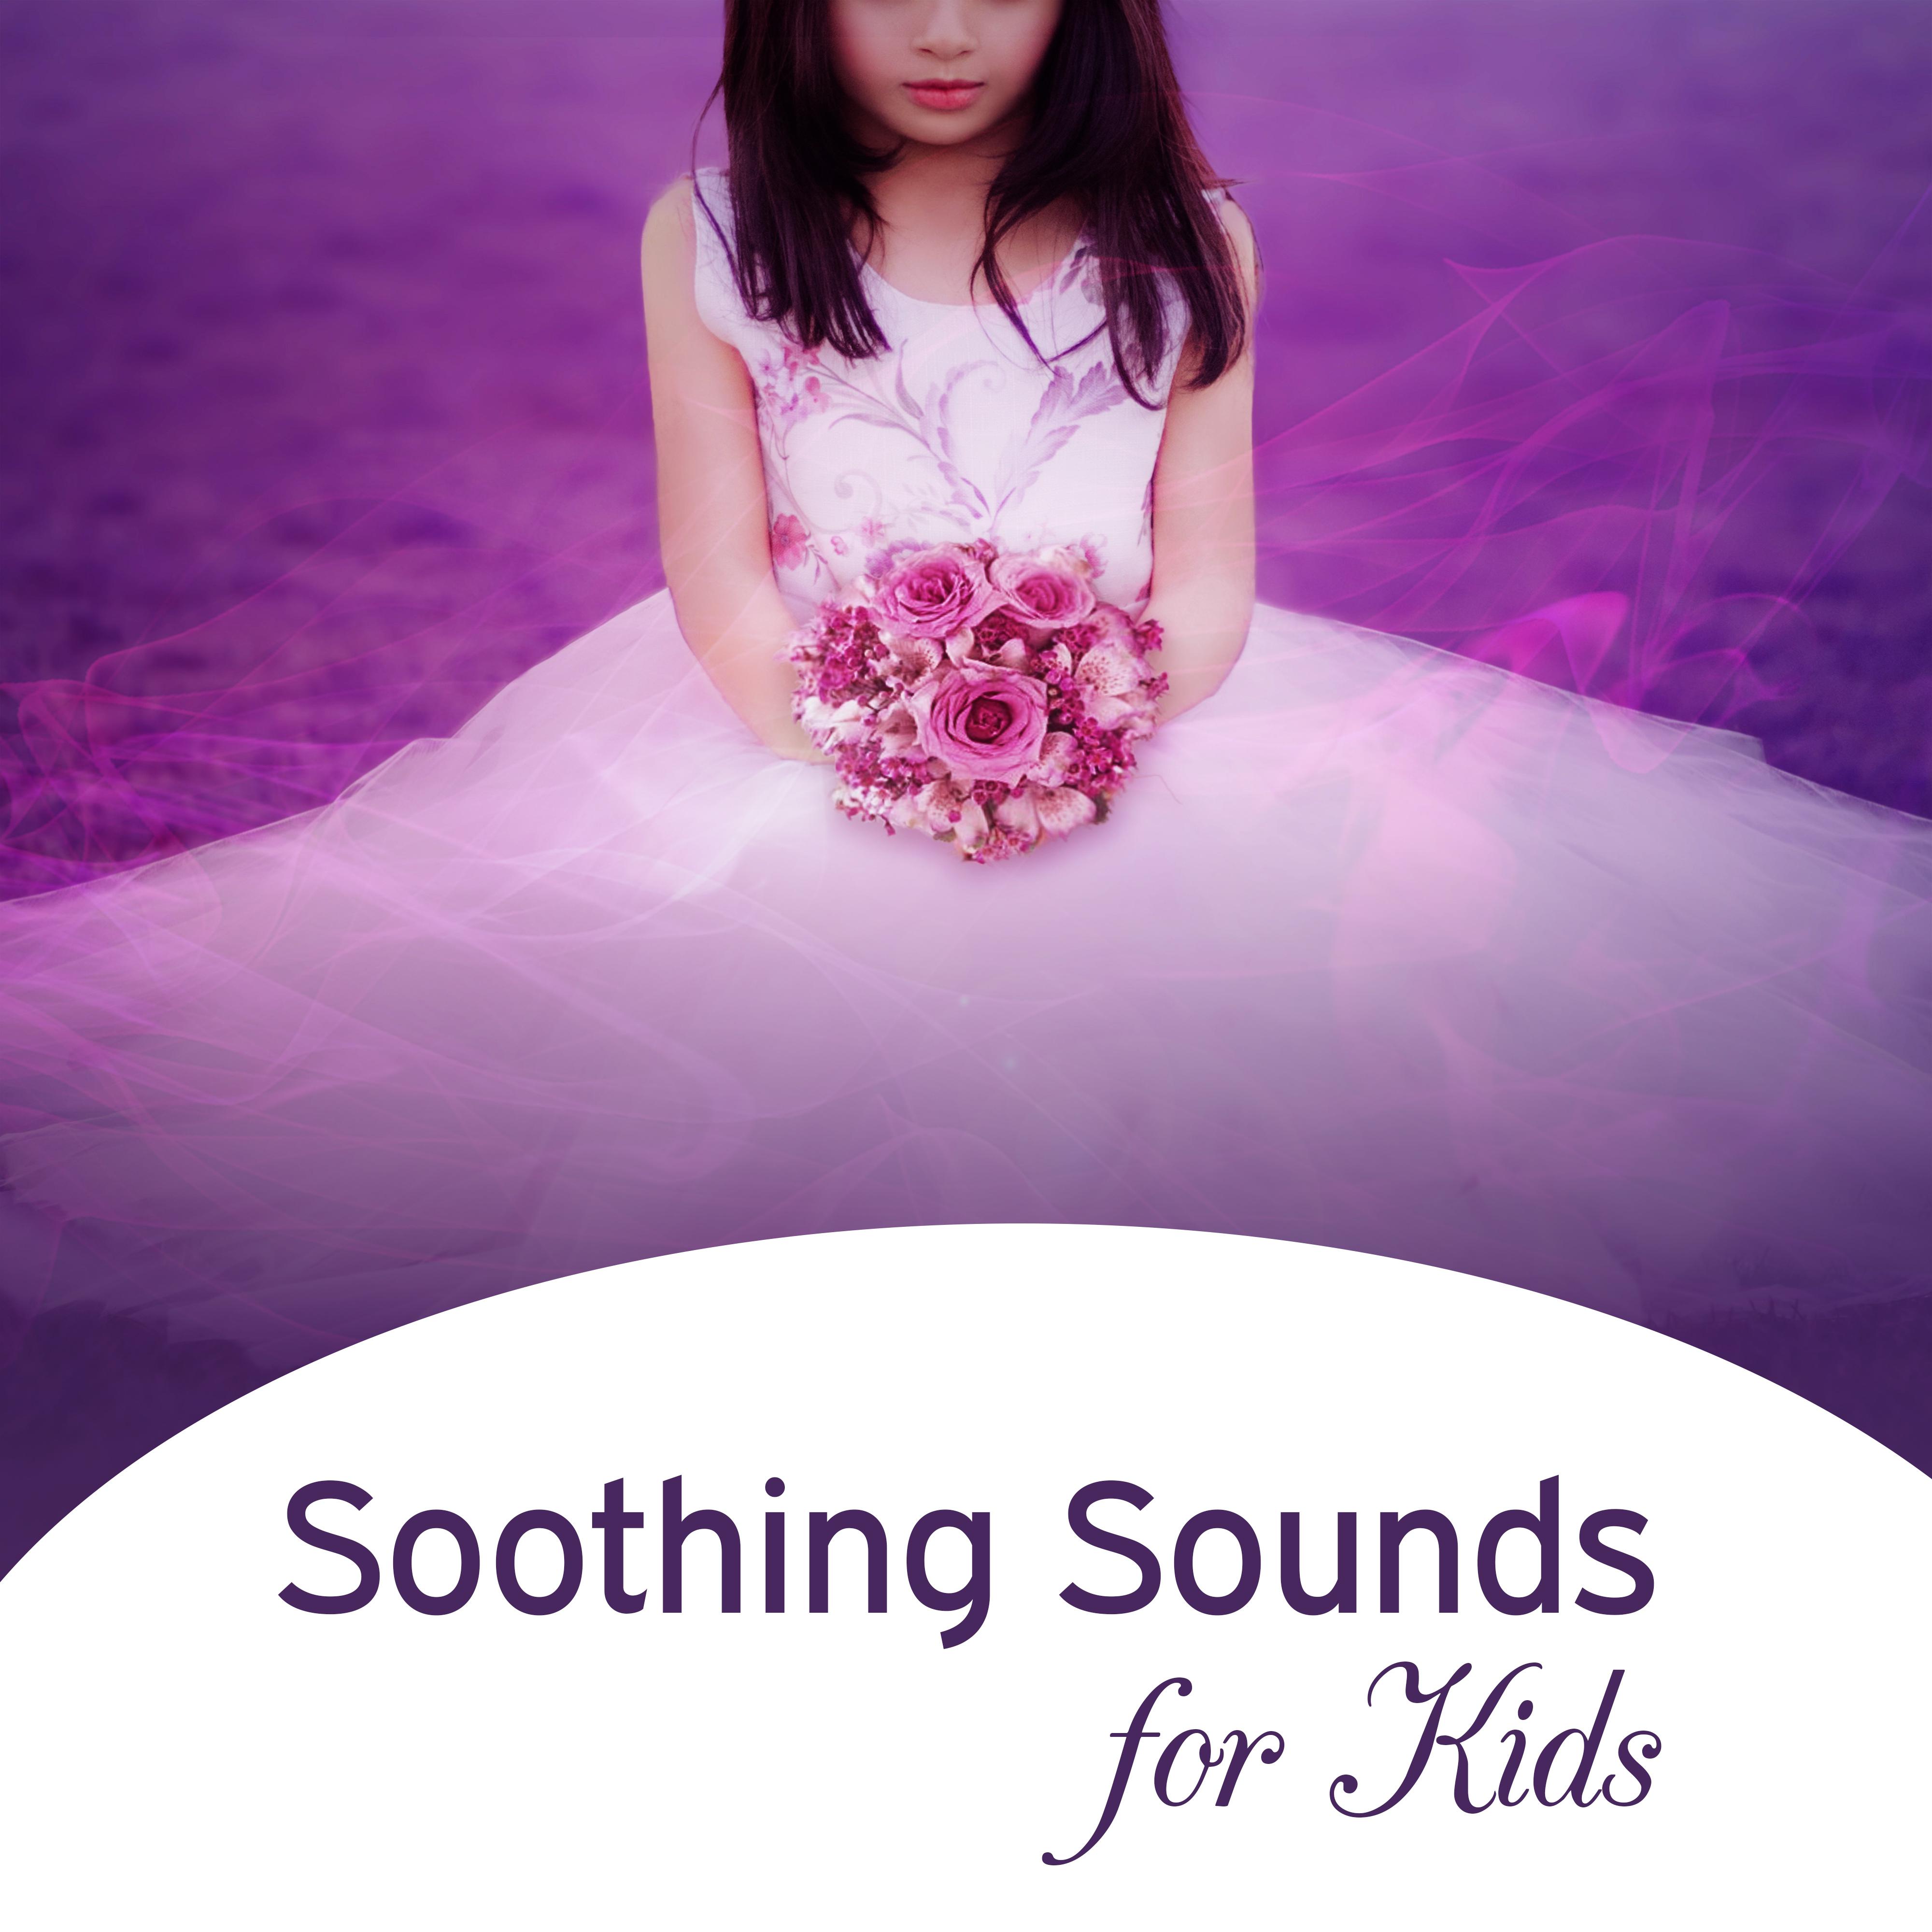 Soothing Sounds for Kids  Instrumental Classical Music, Pure Relaxation, Sweet Lullabies, Baby Music, Bedtime